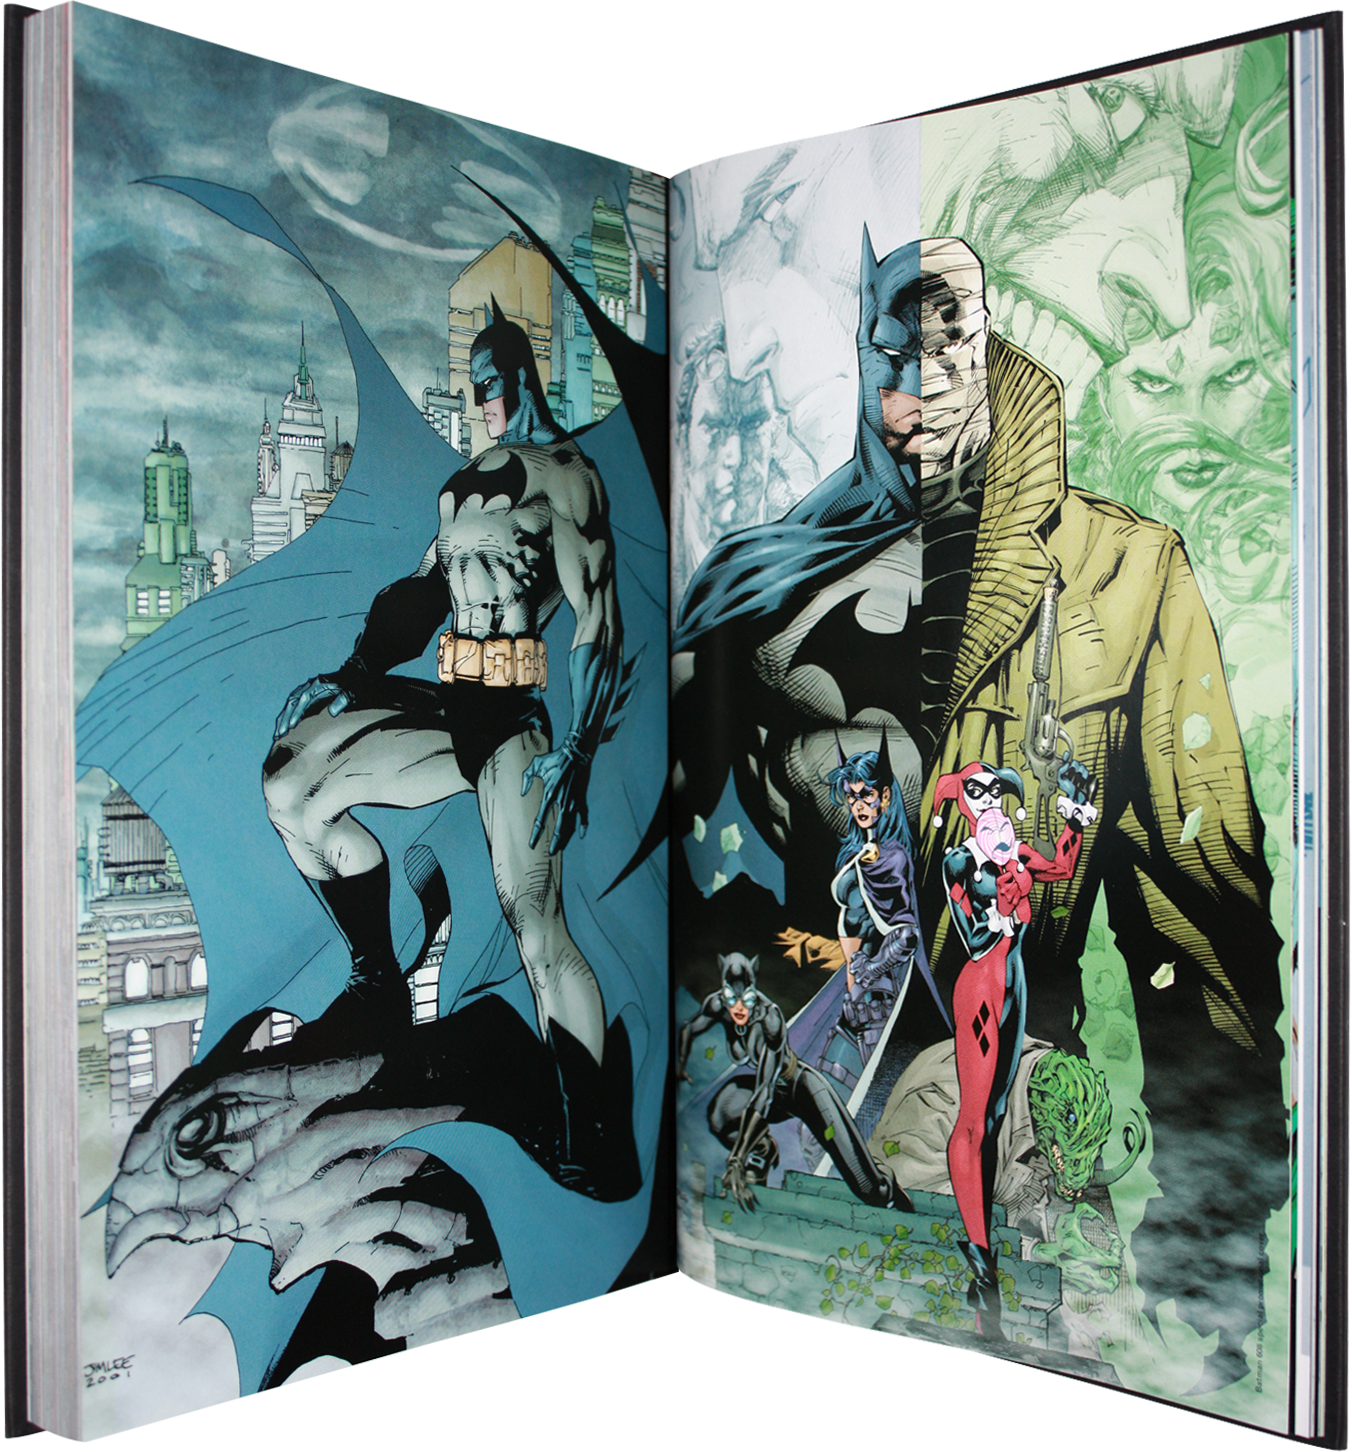 Comic Books Movies Games Blog Everything Related To Fiction Source Presented By League Of Fiction Absolute Batman Hush Jeph Loeb Jim Lee Scott Williams Dc Comics